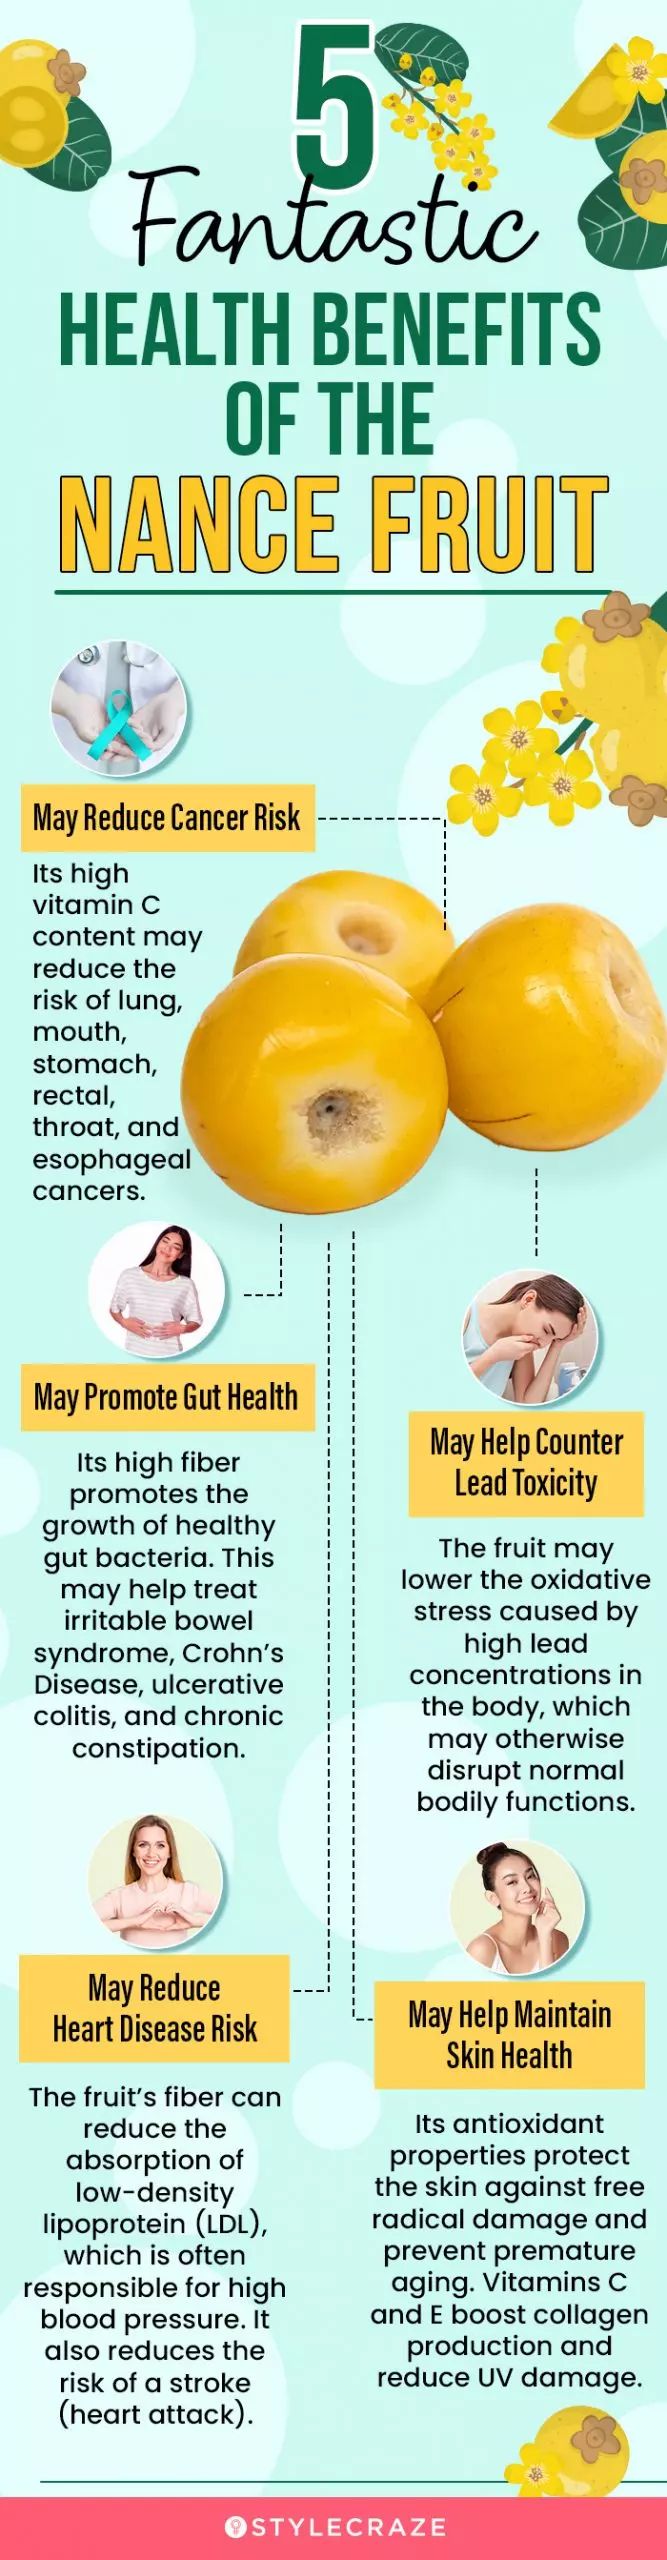 5 fantastic health benefits of the nance fruit (infographic)